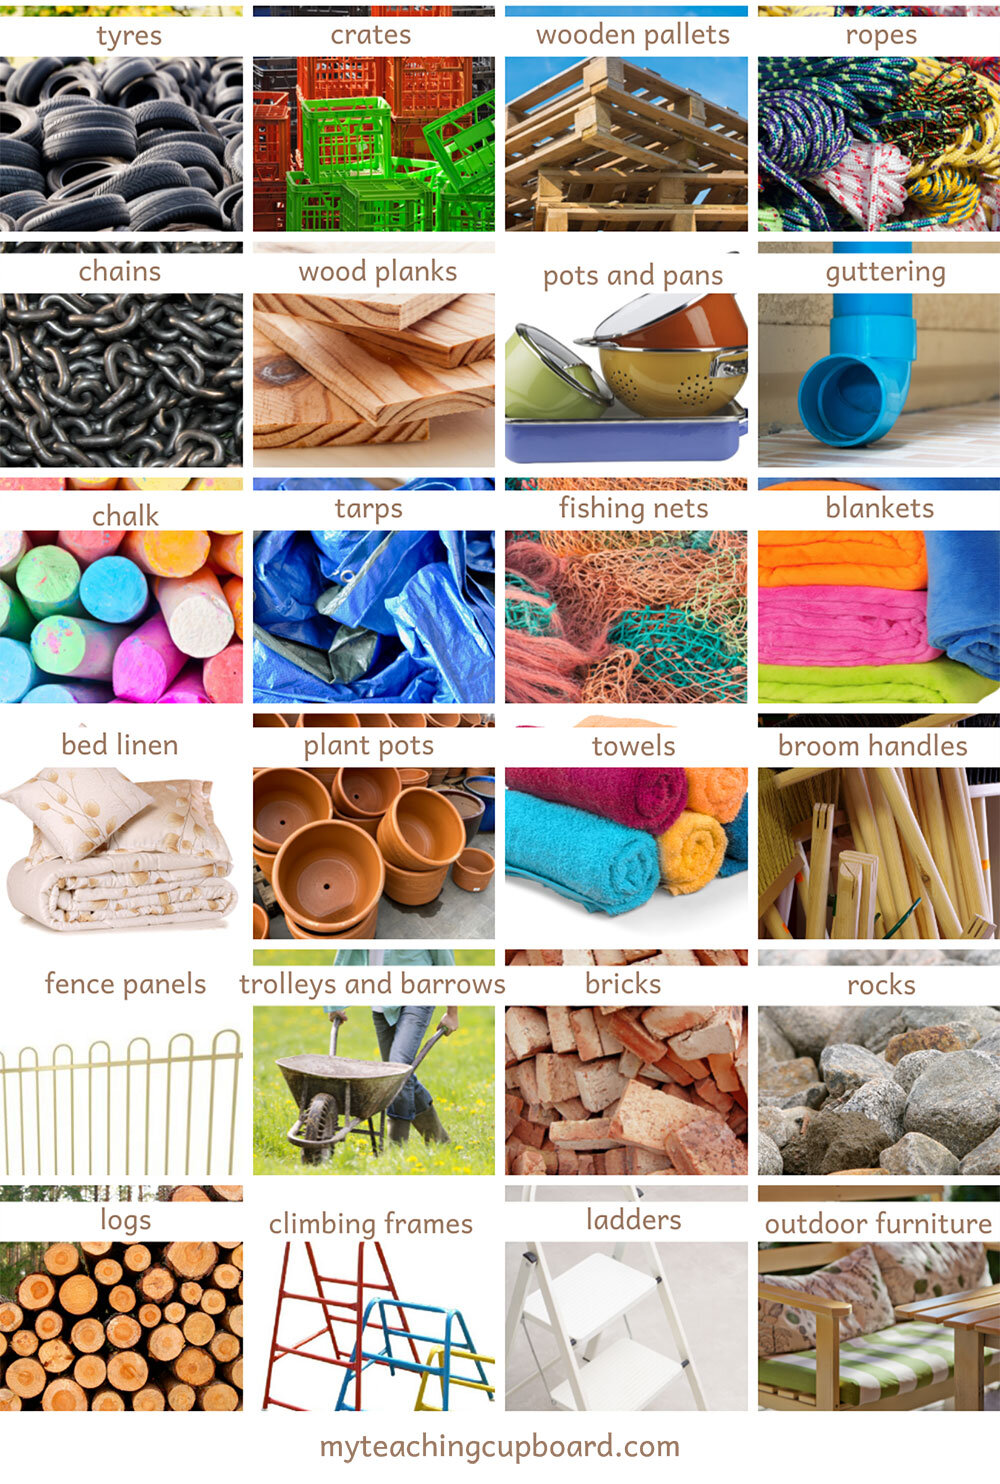 Loose Parts Resources — My Teaching Cupboard